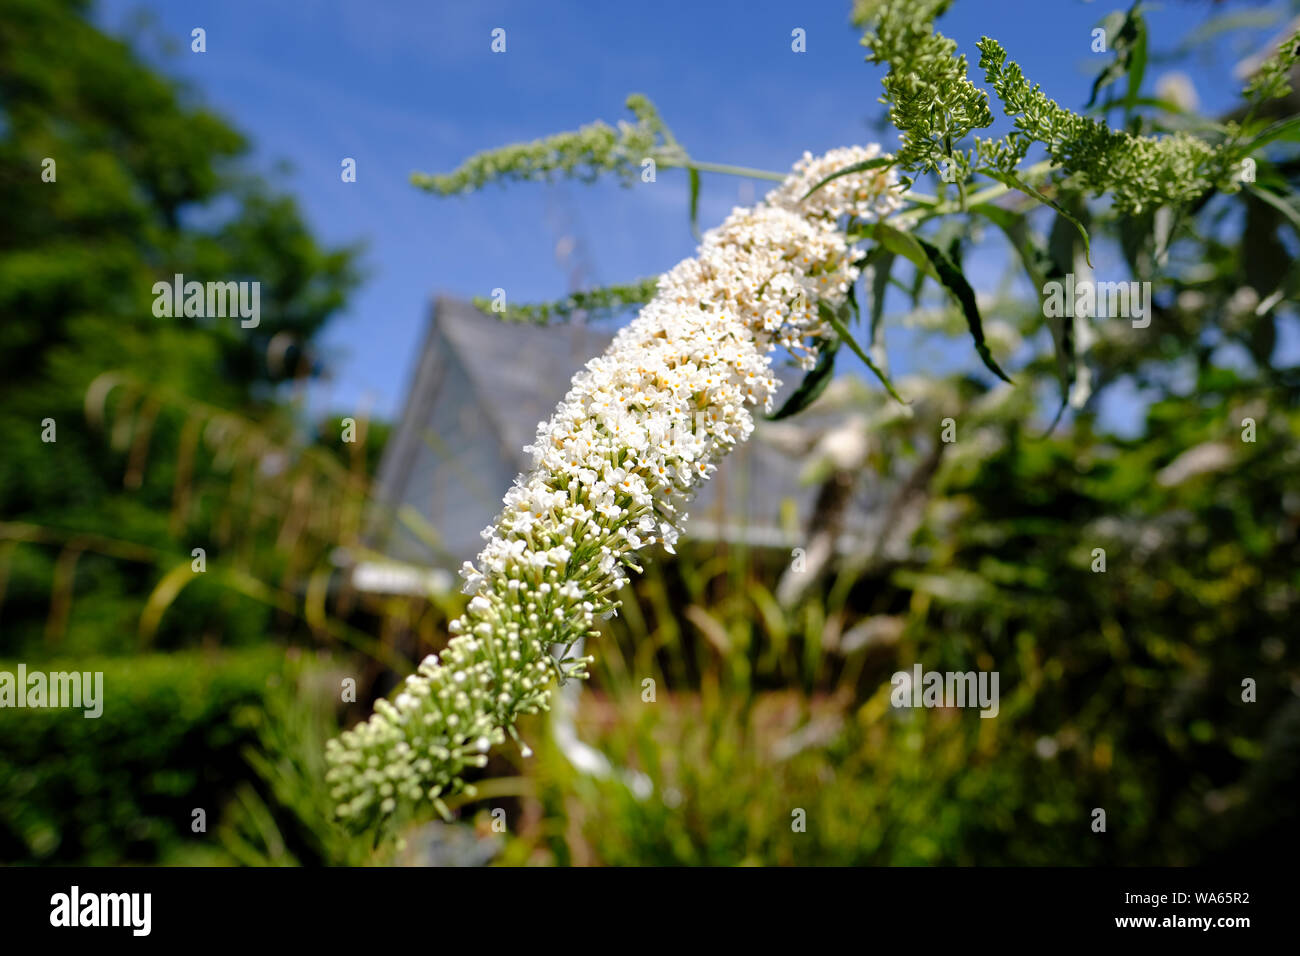 Buddleja Davidii or White Profusion flowers in bloom in an English cottage garden Stock Photo